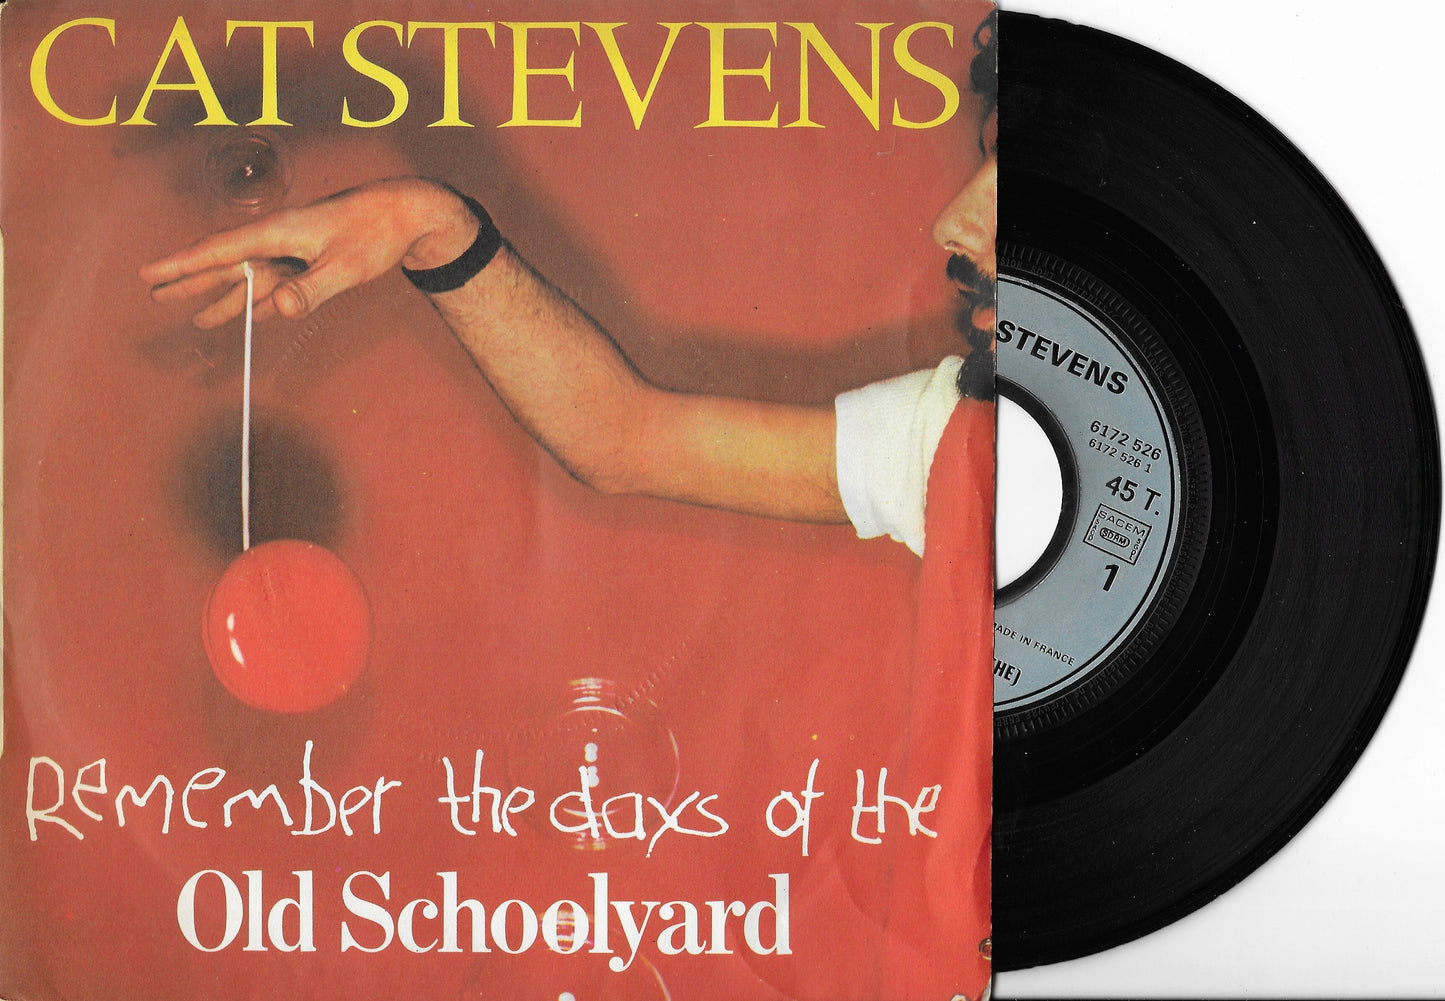 CAT STEVENS - (Remember The Days Of The) Old School Yard